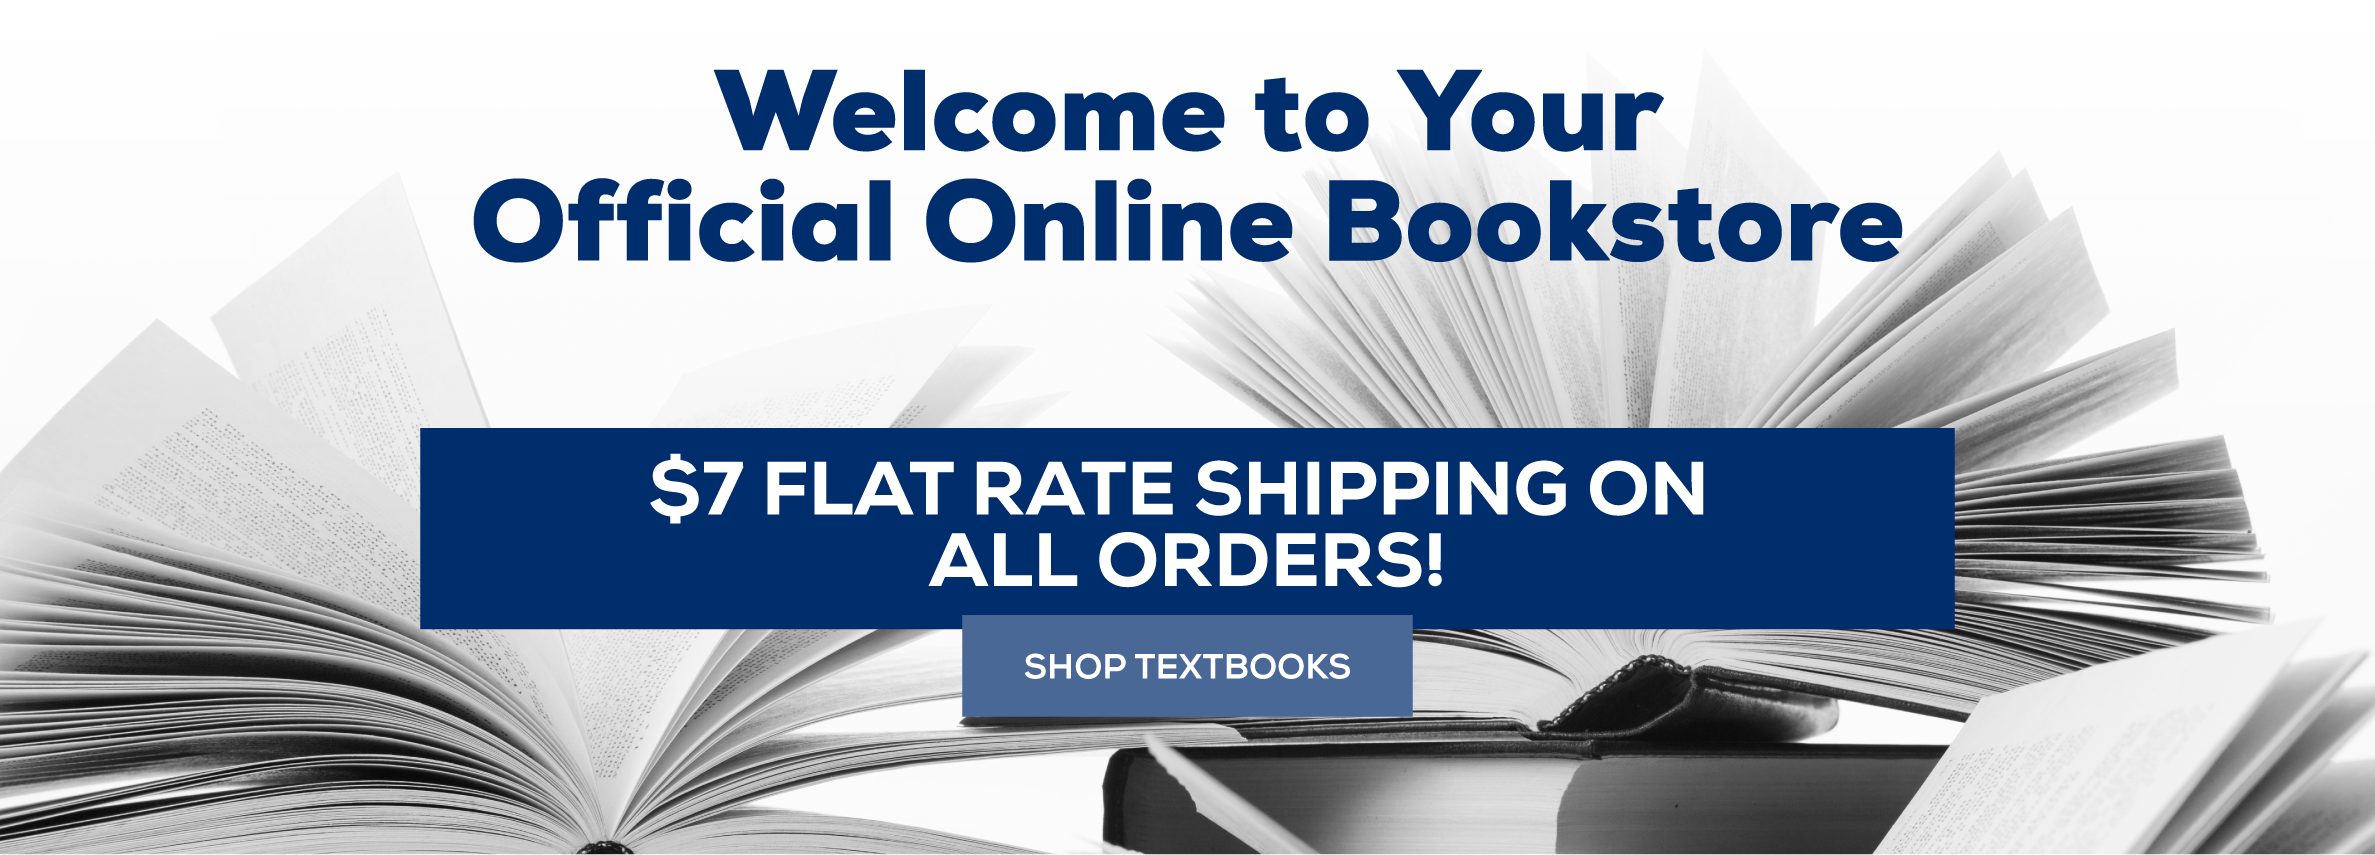 Welcome to your official online bookstore. $7 flat rate shipping on all orders! Shop Textbooks